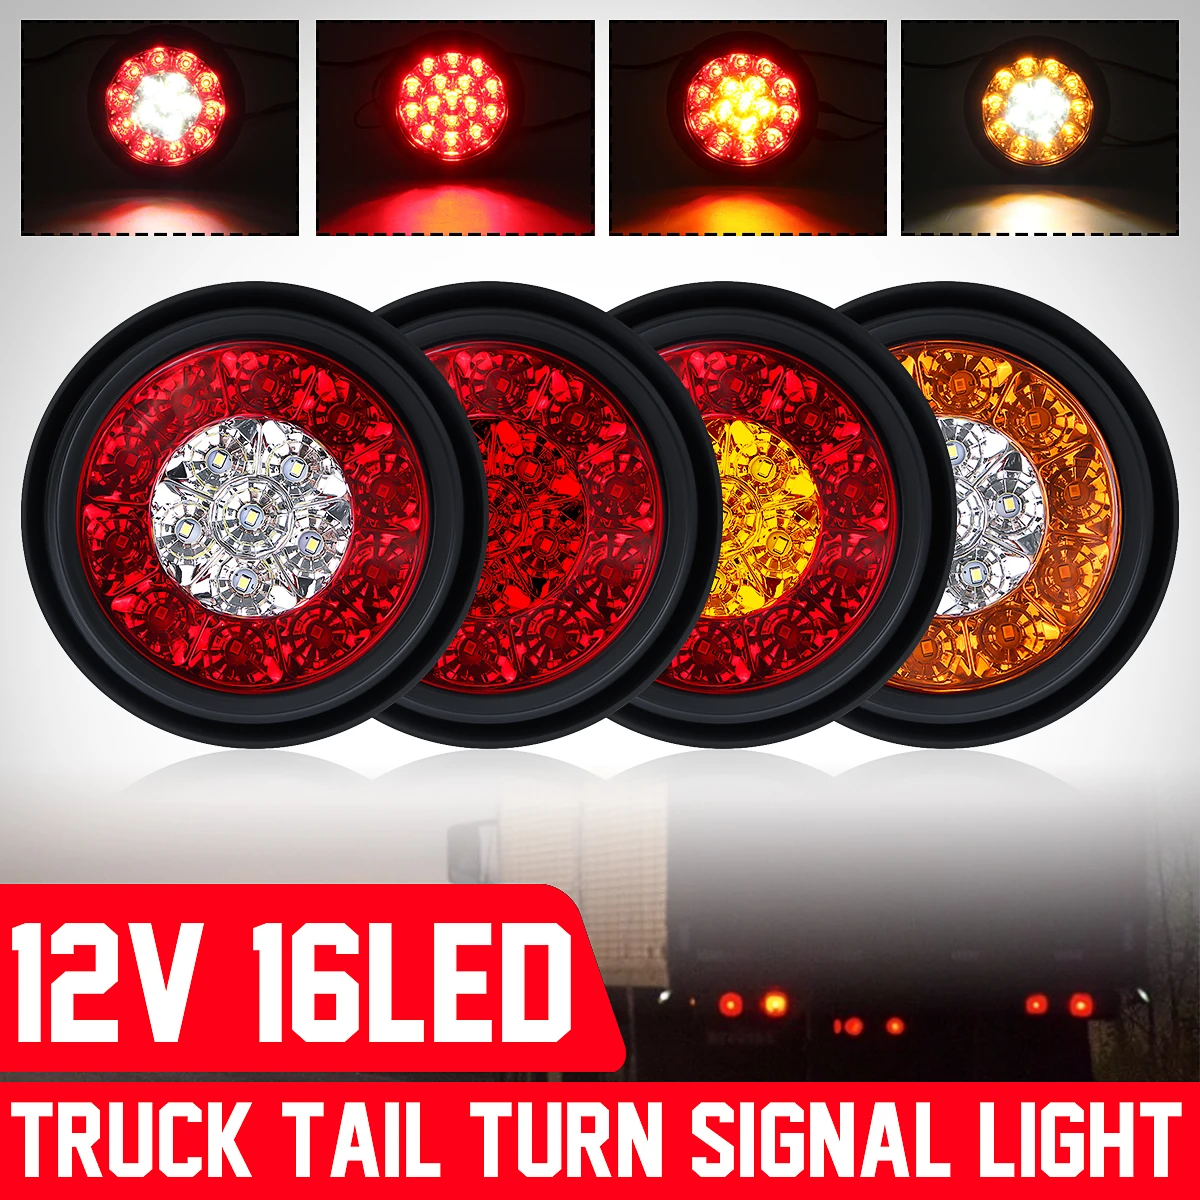 2 Pcs Red/Amber Round LED Truck Trailer Amber/Red Taillights with Stainless Steel Rings 16 LED DC 12V Waterproof Stop Brake Running Turn Signal Lights Tail Lamps for RV Trailer 